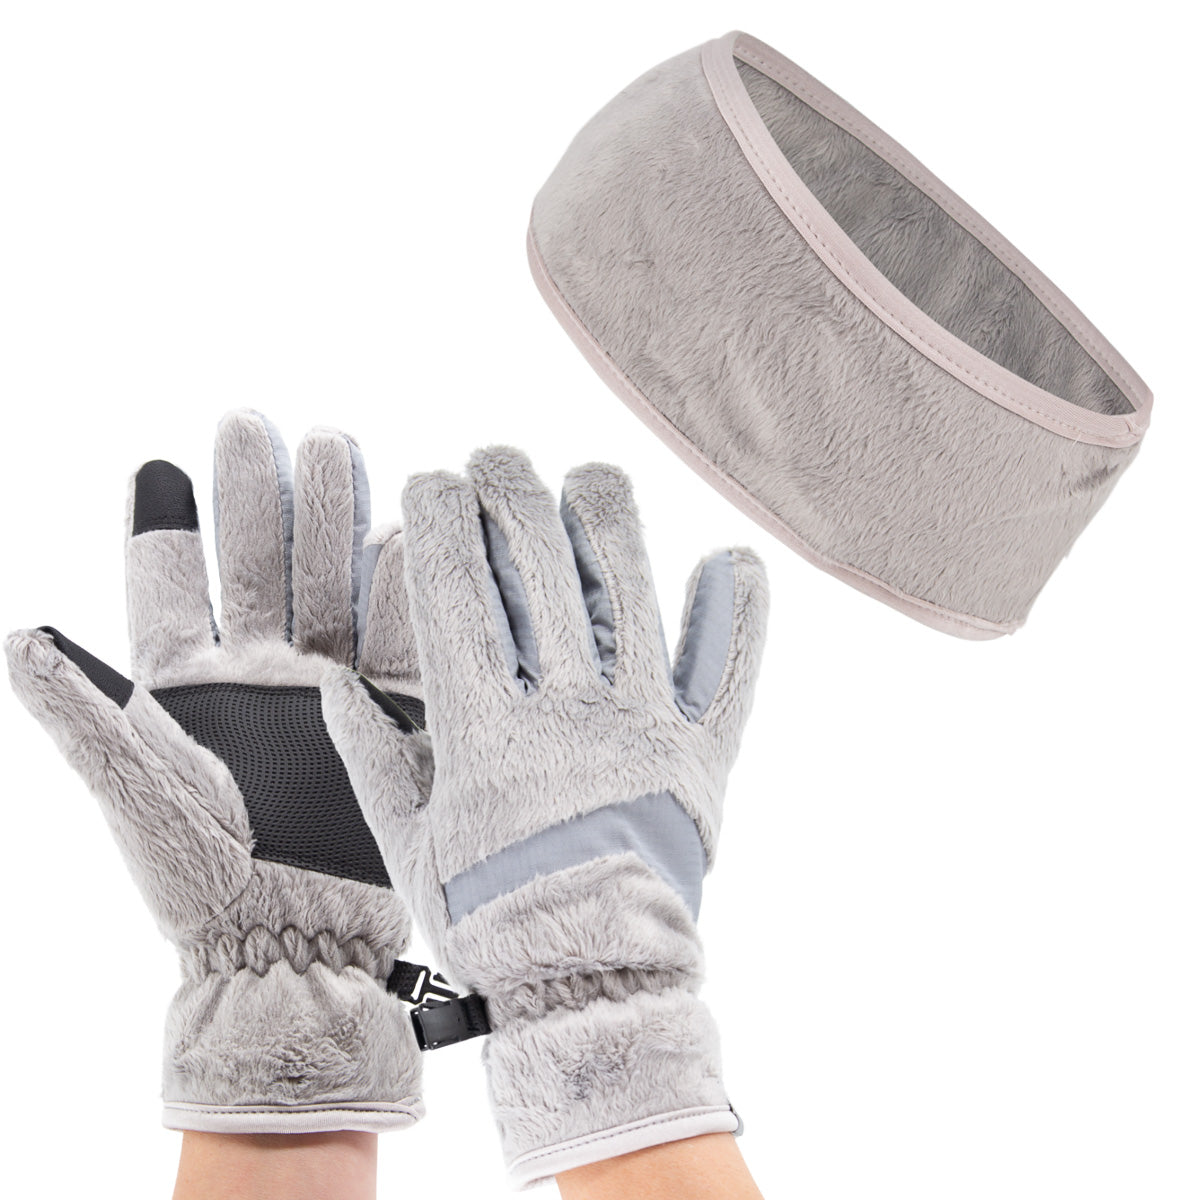 Womens Touchscreen Gloves Headband Set – For Texting, Smartphone